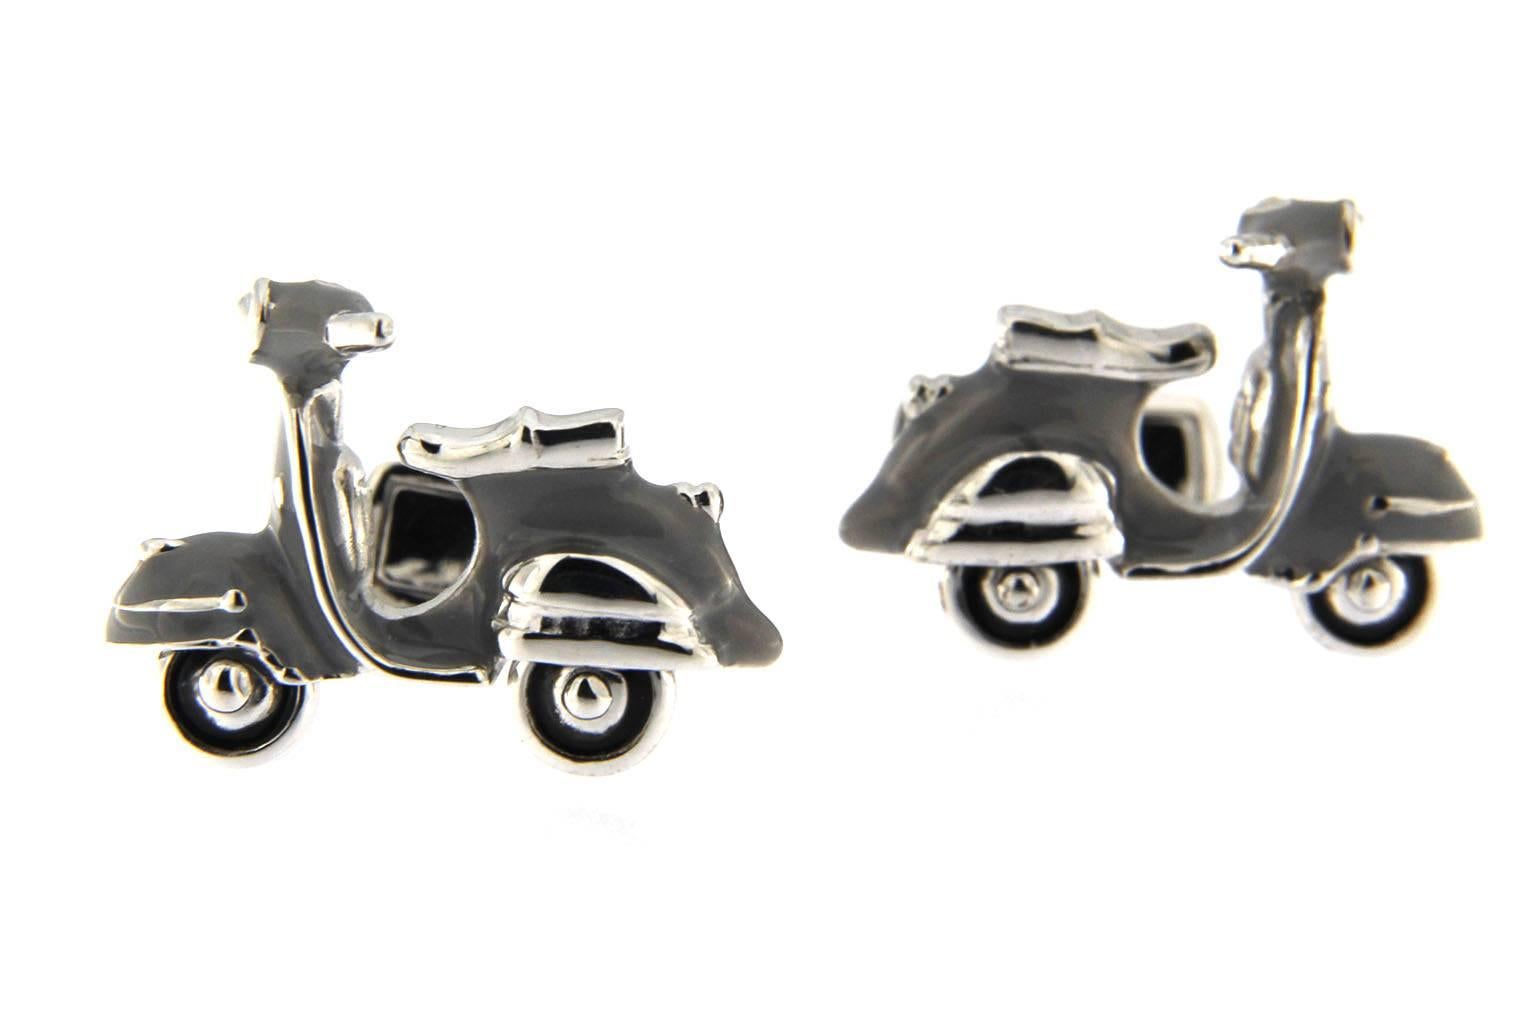 Jona design collection, hand crafted in Italy, sterling silver scooter cufflinks with rotating wheels and black enamel.
Dimensions : H 0.65 in x W 0.90 in x D 0.20 in - H 16.60 mm x W 23.05 mm X D 5.17 mm.
All Jona jewelry is new and has never been